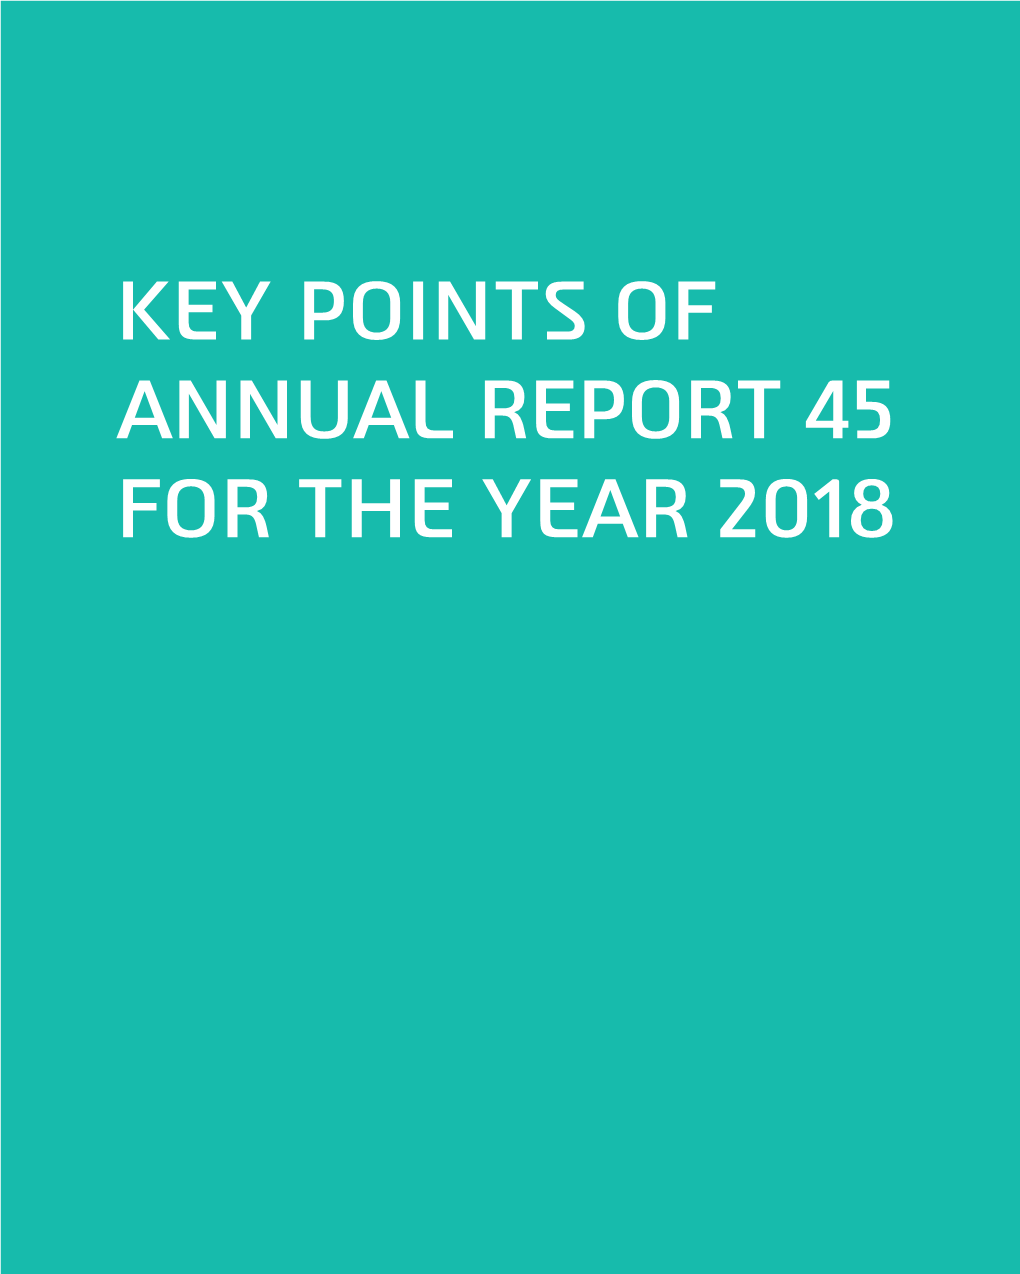 KEY POINTS of ANNUAL REPORT 45 for the YEAR 2018 KEY POINTS of ANNUAL REPORT 45 for the YEAR 2018 Breakdown of the Complaints According to the Bodies Complained About